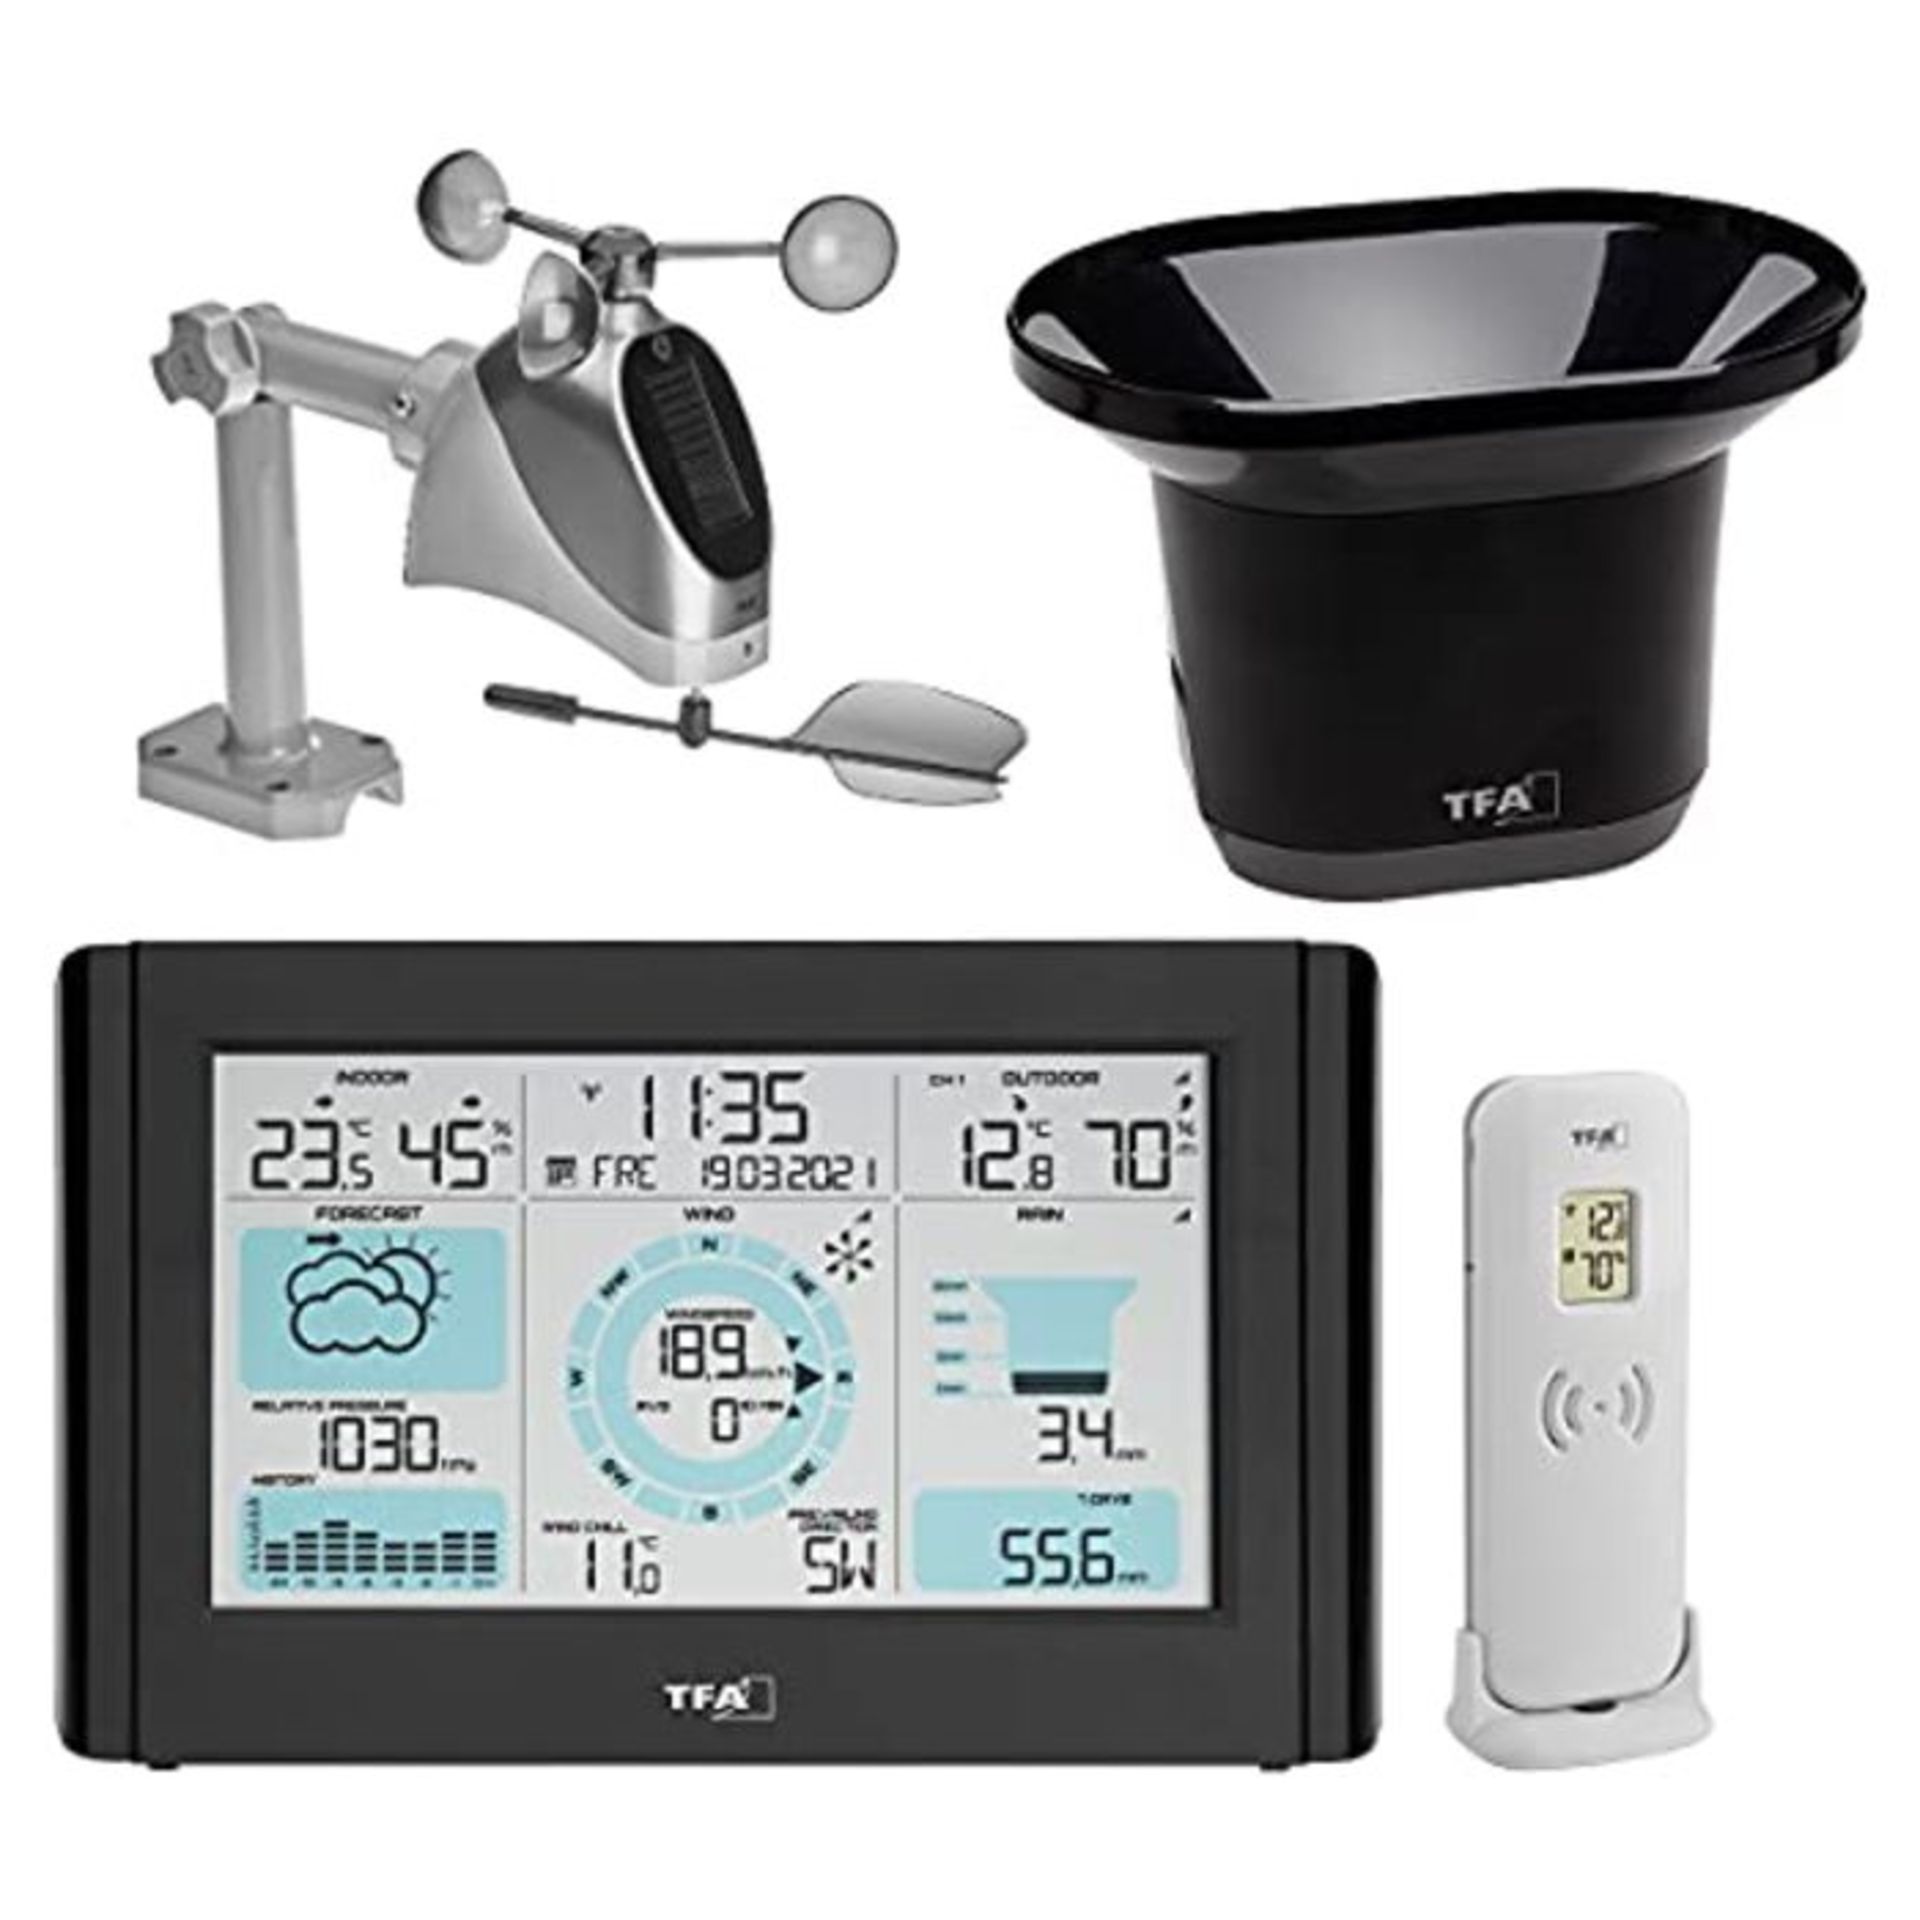 RRP £85.00 TFA Dostmann wireless weather station with wind and rain gauge WEATHER PRO 35.1161.01